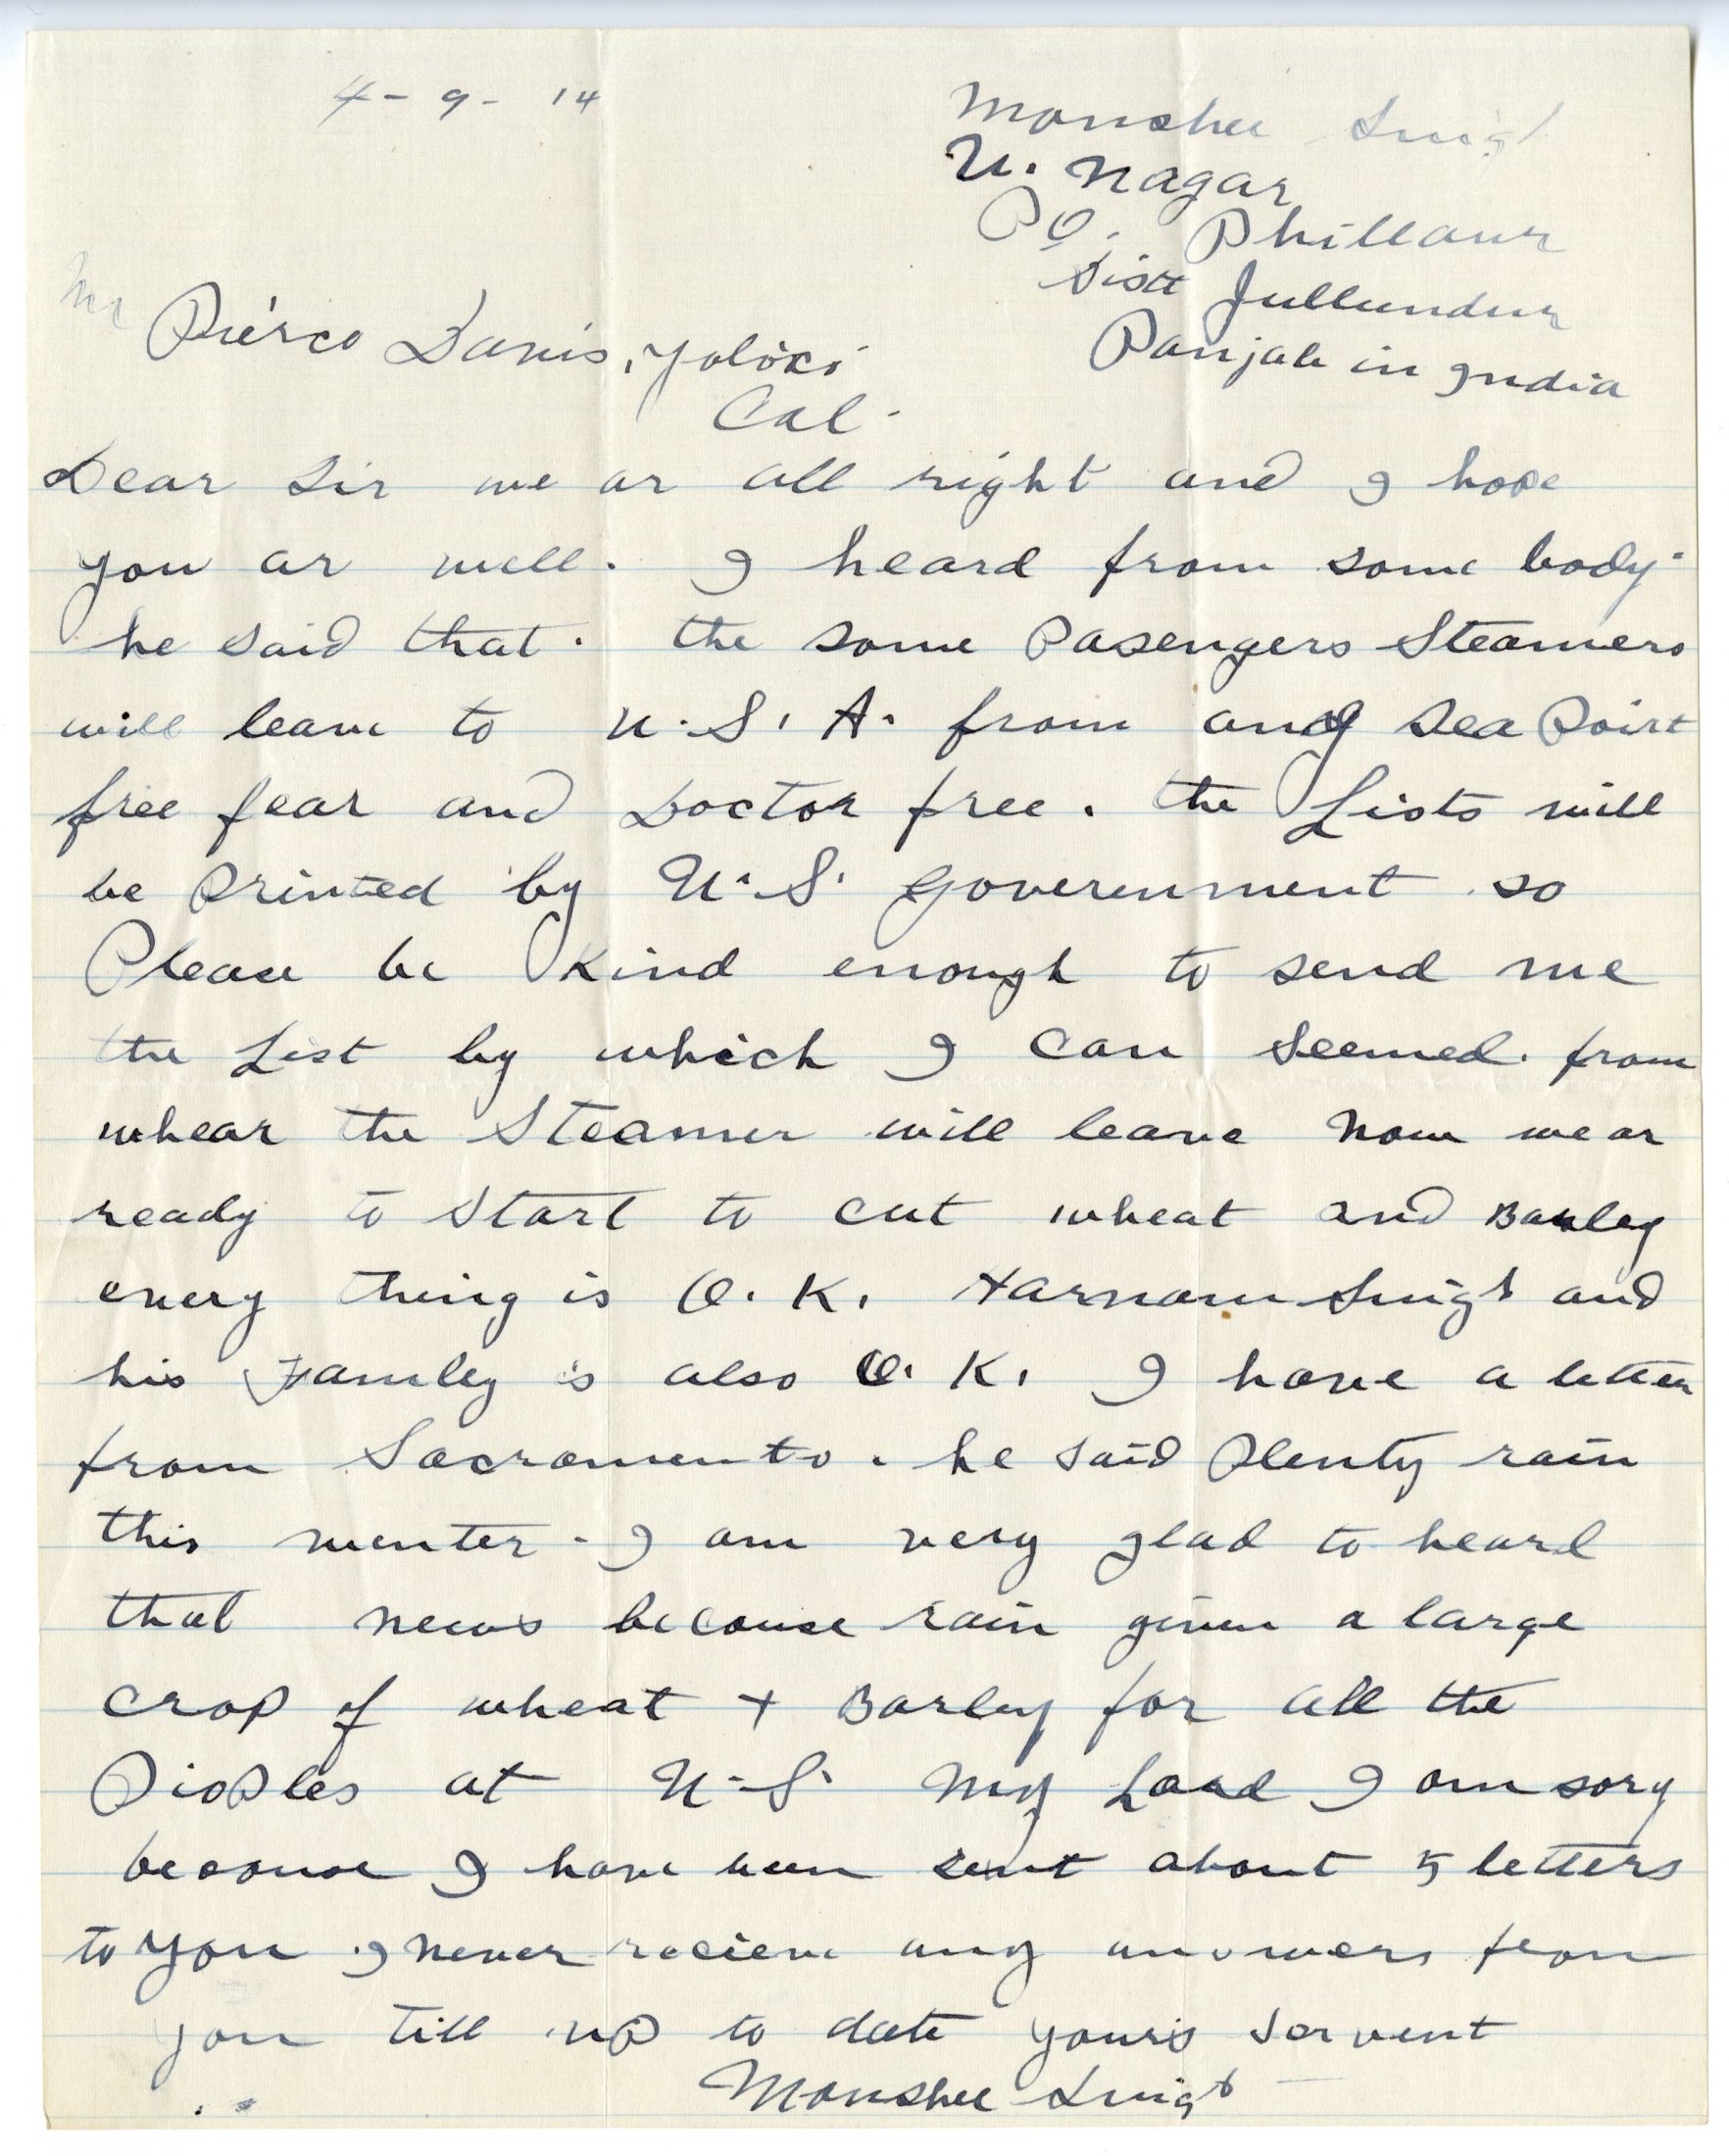 A Rare Letter From a Punjabi Pioneer From Monshu Singh to George Pierce Jr. From Nagar, Punjab, India, 1914. The Letter Was Likely Penned by an Educated Person. Pierce Family Papers, Special Collections, University of California, Davis Library.